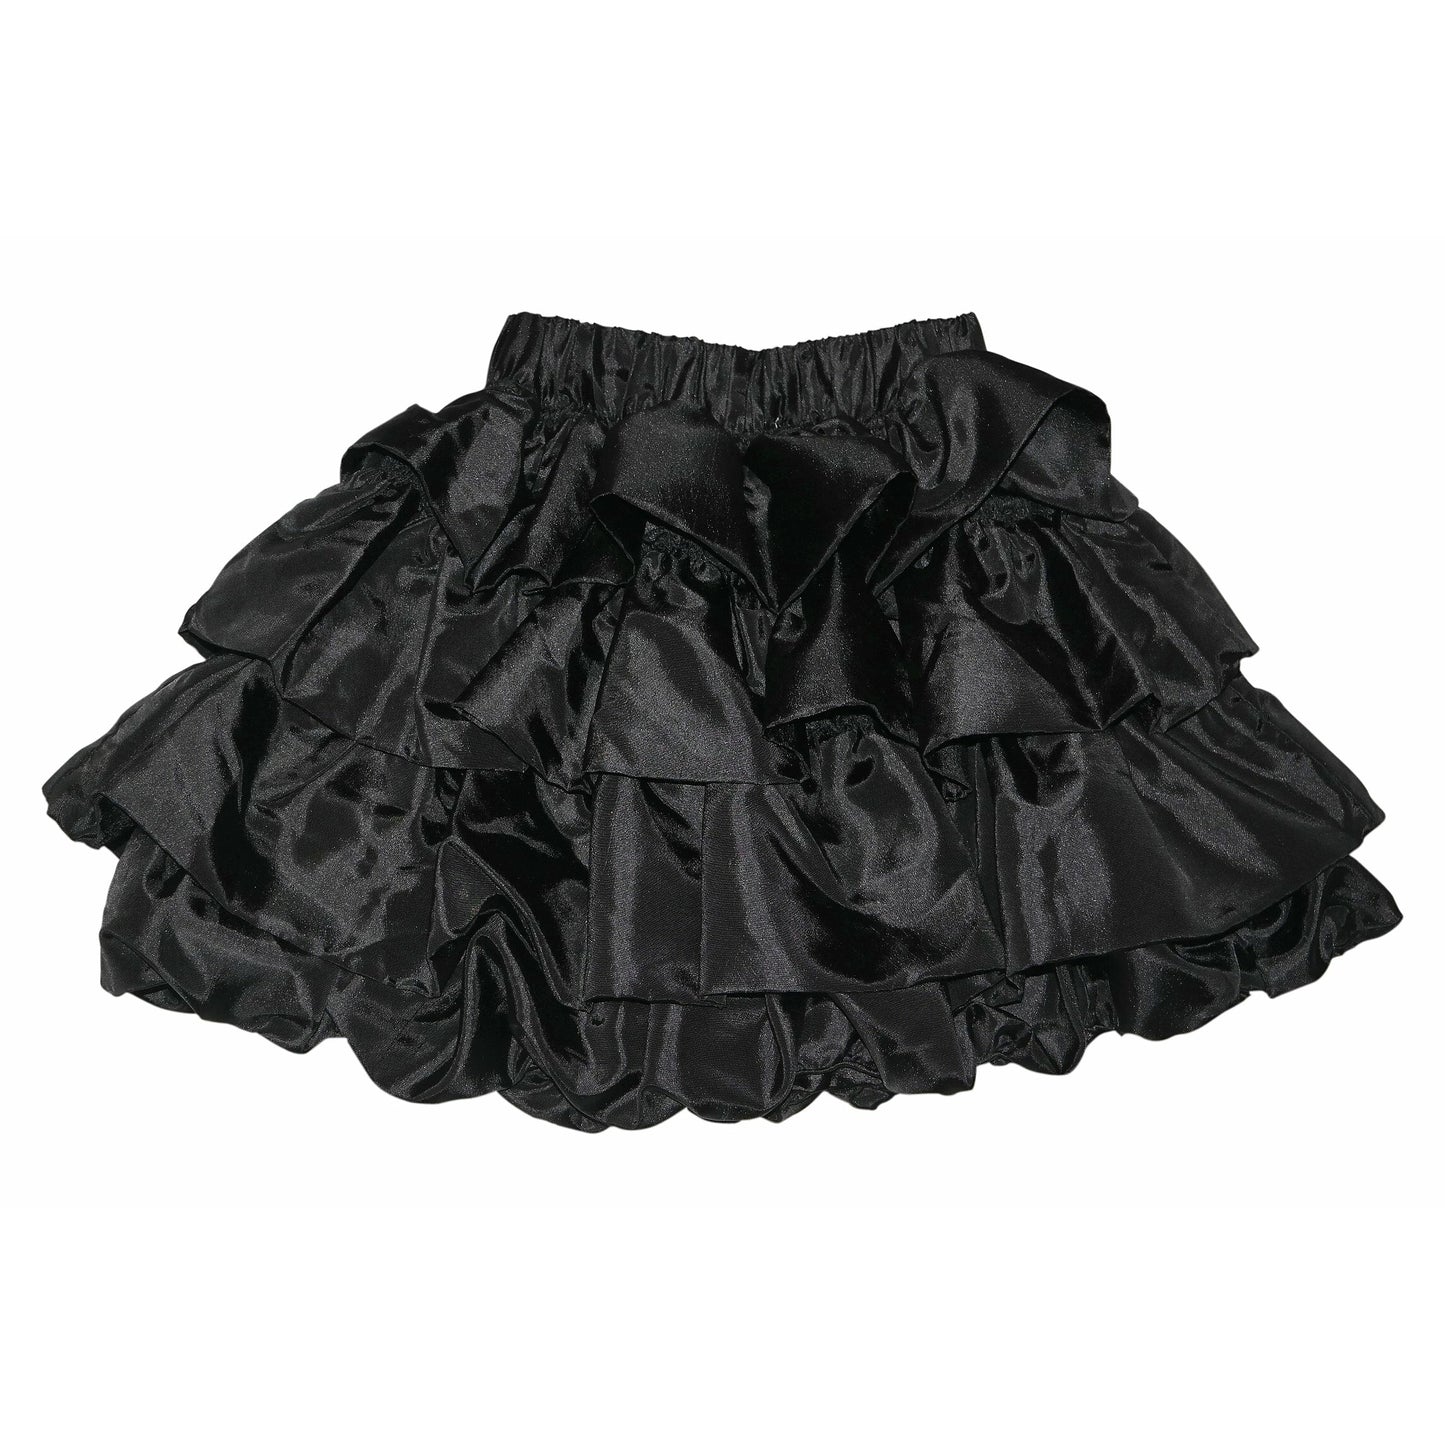 Lucia Black Girls Party Bubble skirt